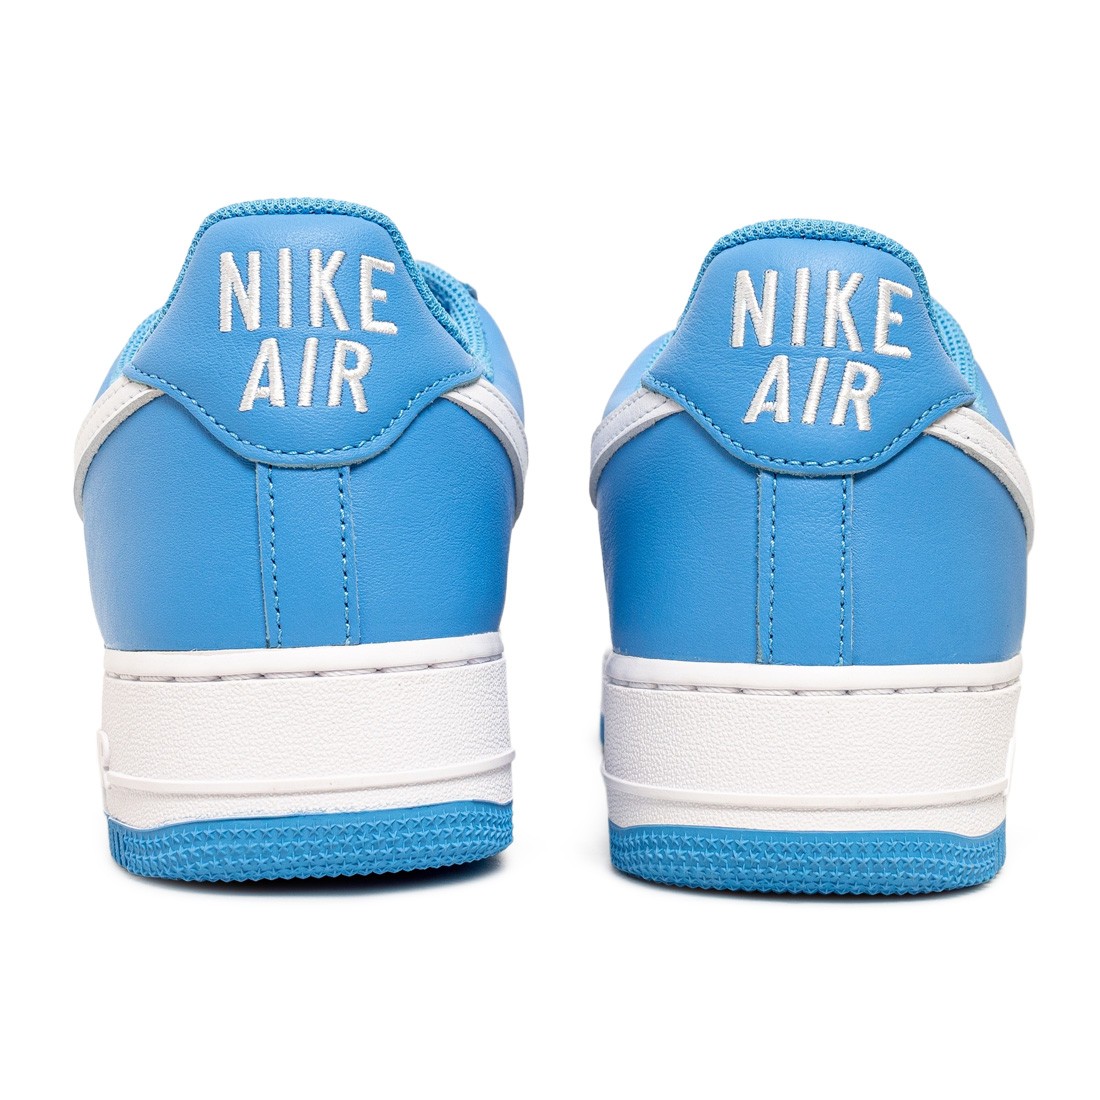 Nike Air Force 1 Low First Use University Blue Men's - DB3597-400 - US